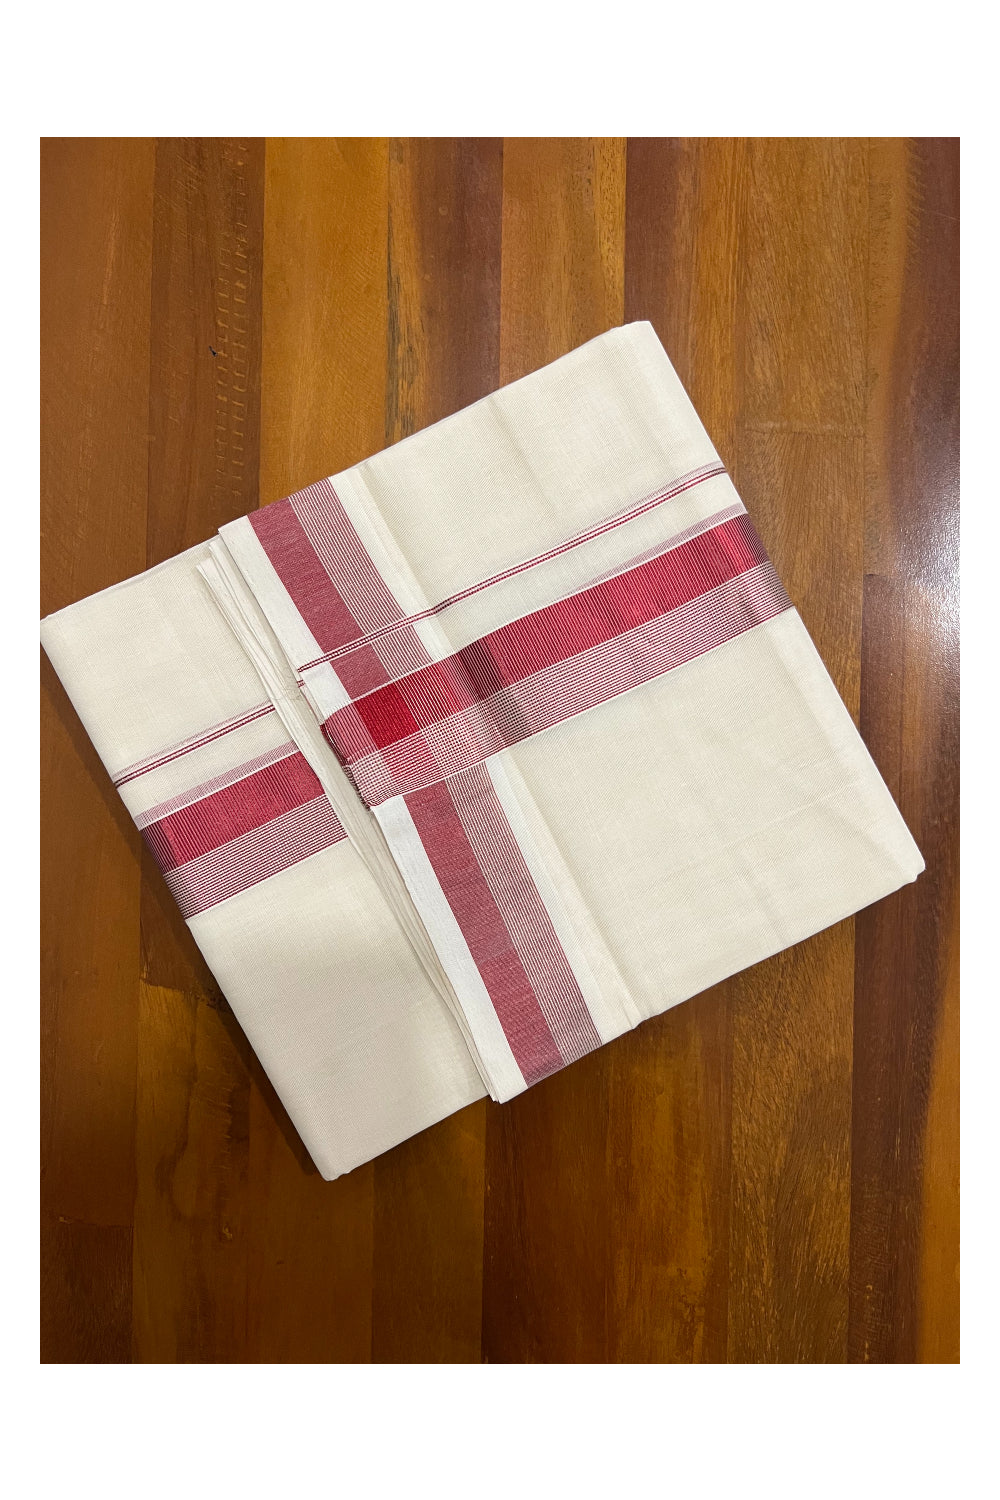 Southloom Kuthampully Handloom Pure Cotton Mundu with Silver and Dark Red Kasavu Border (South Indian Dhoti)